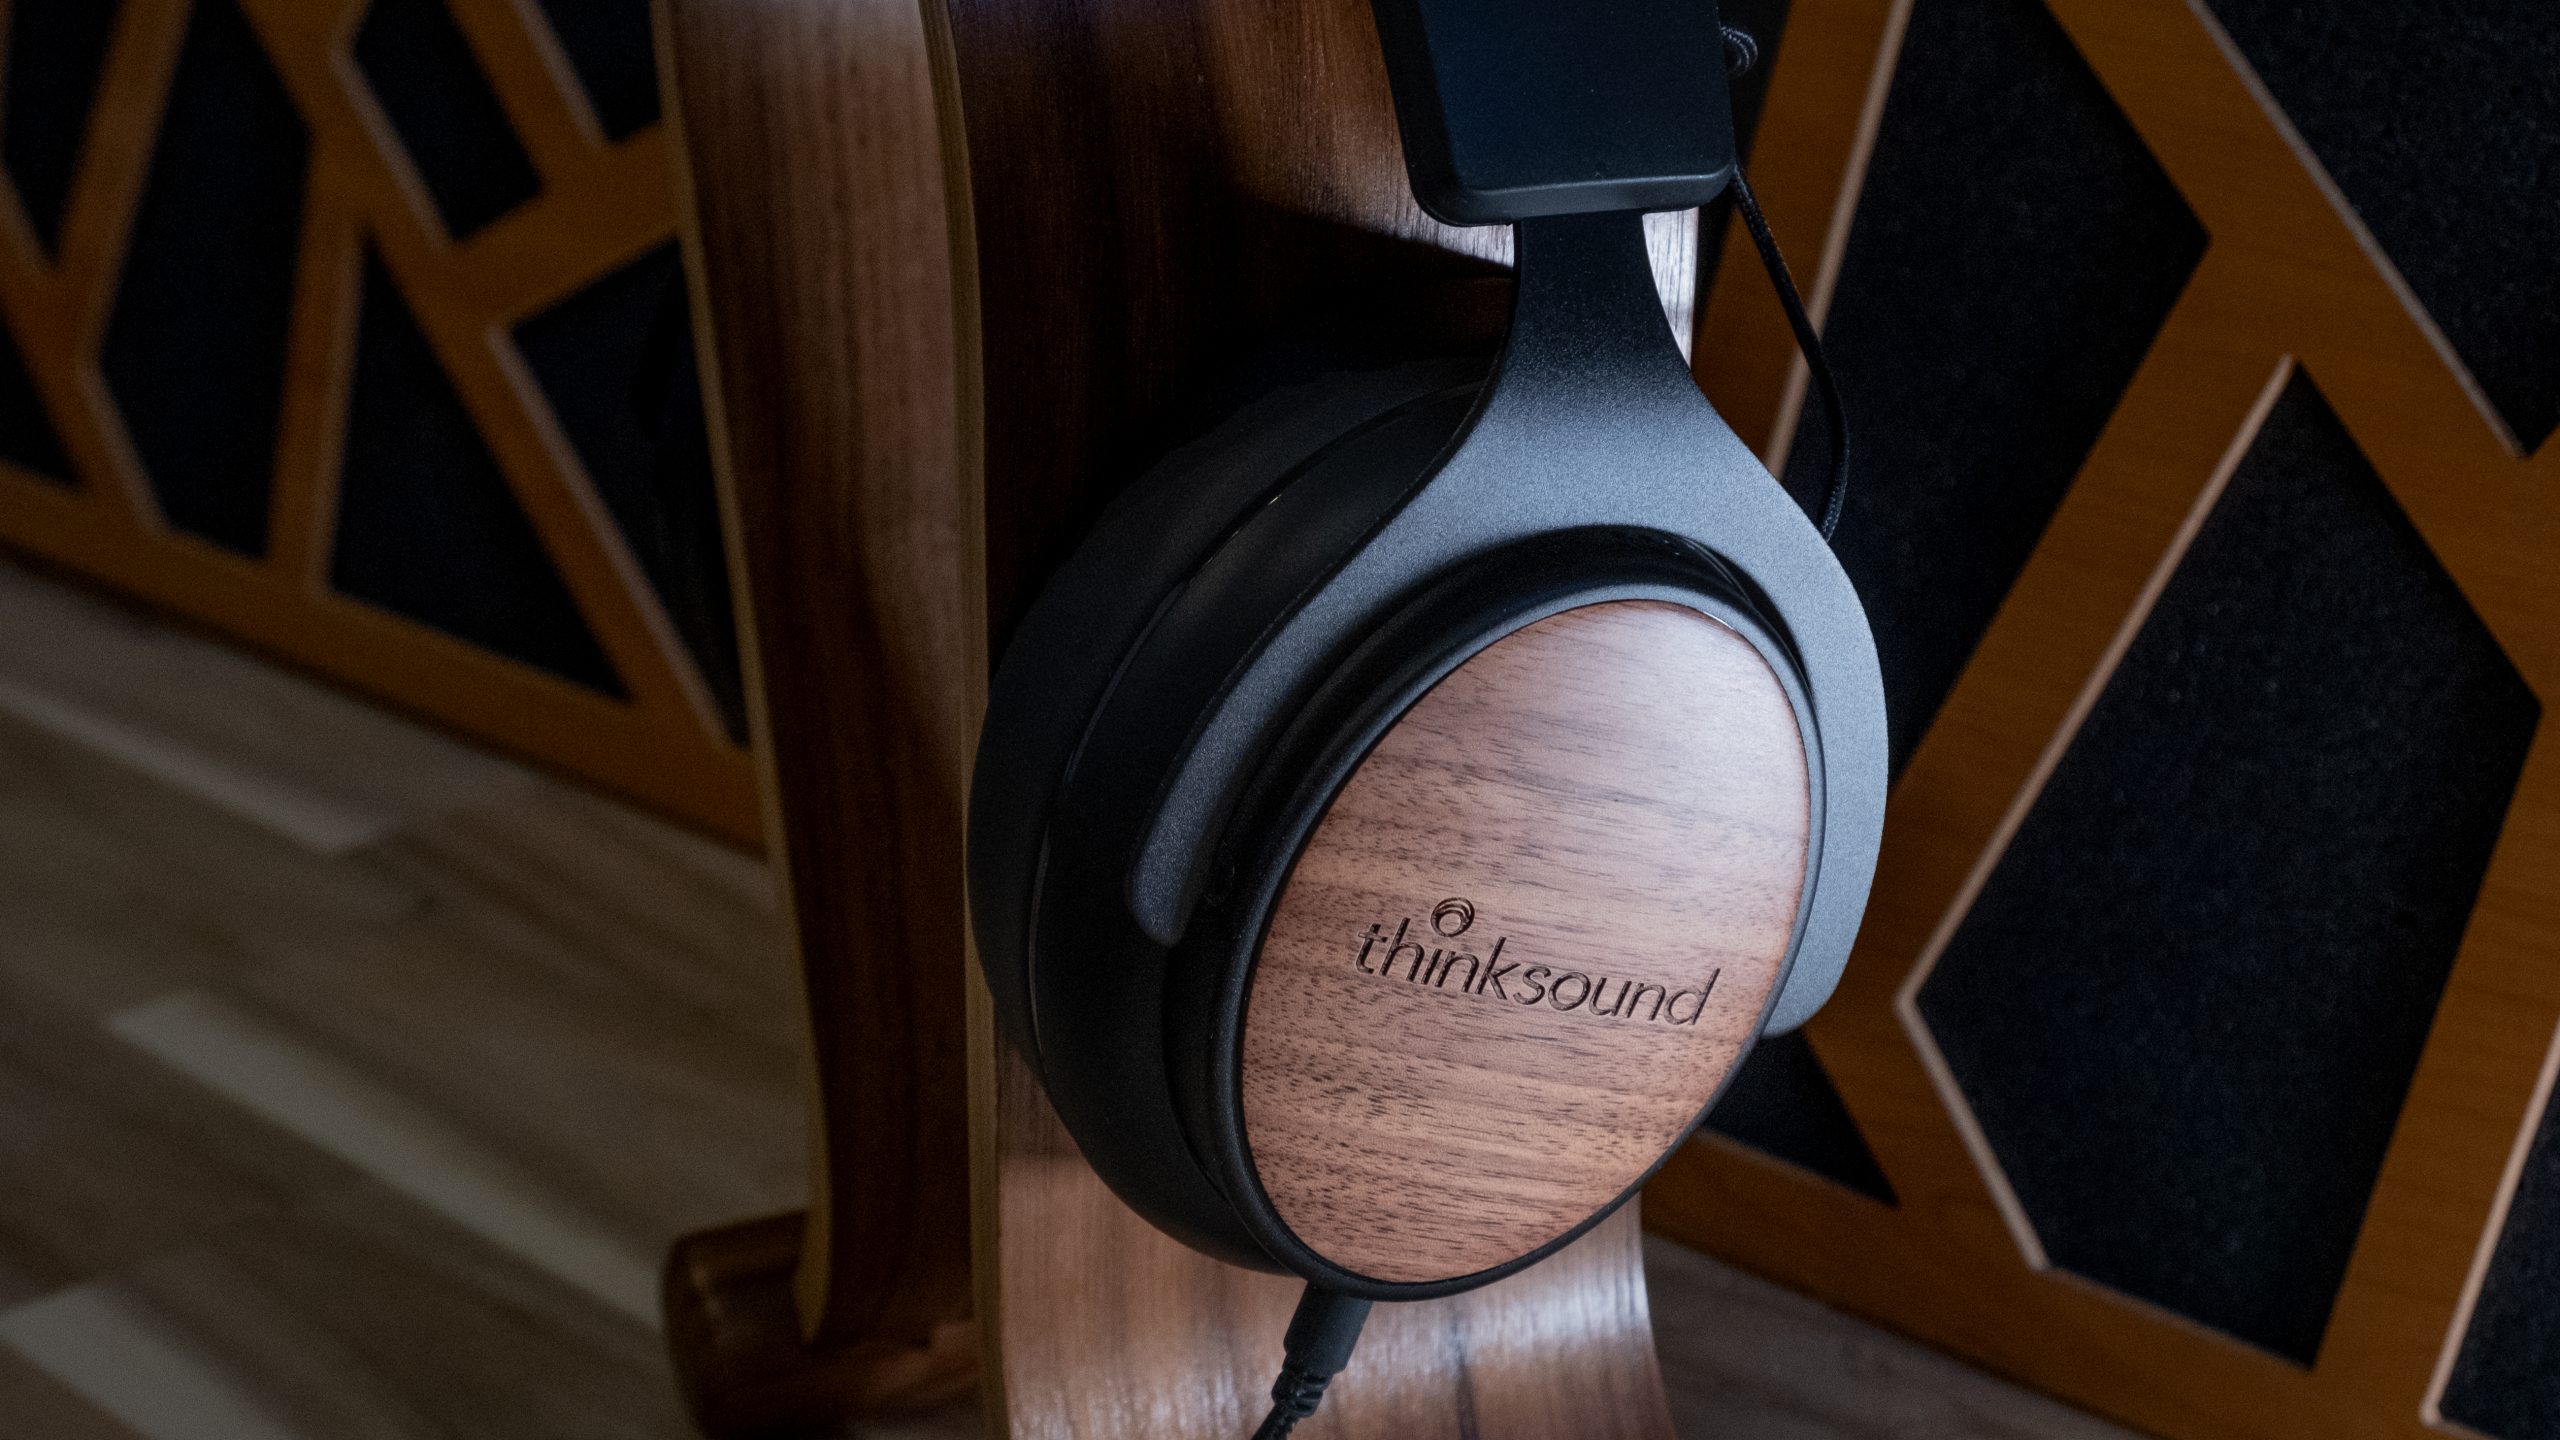 The left ear cup is shown with the removable cable on the Thinksound ov21.